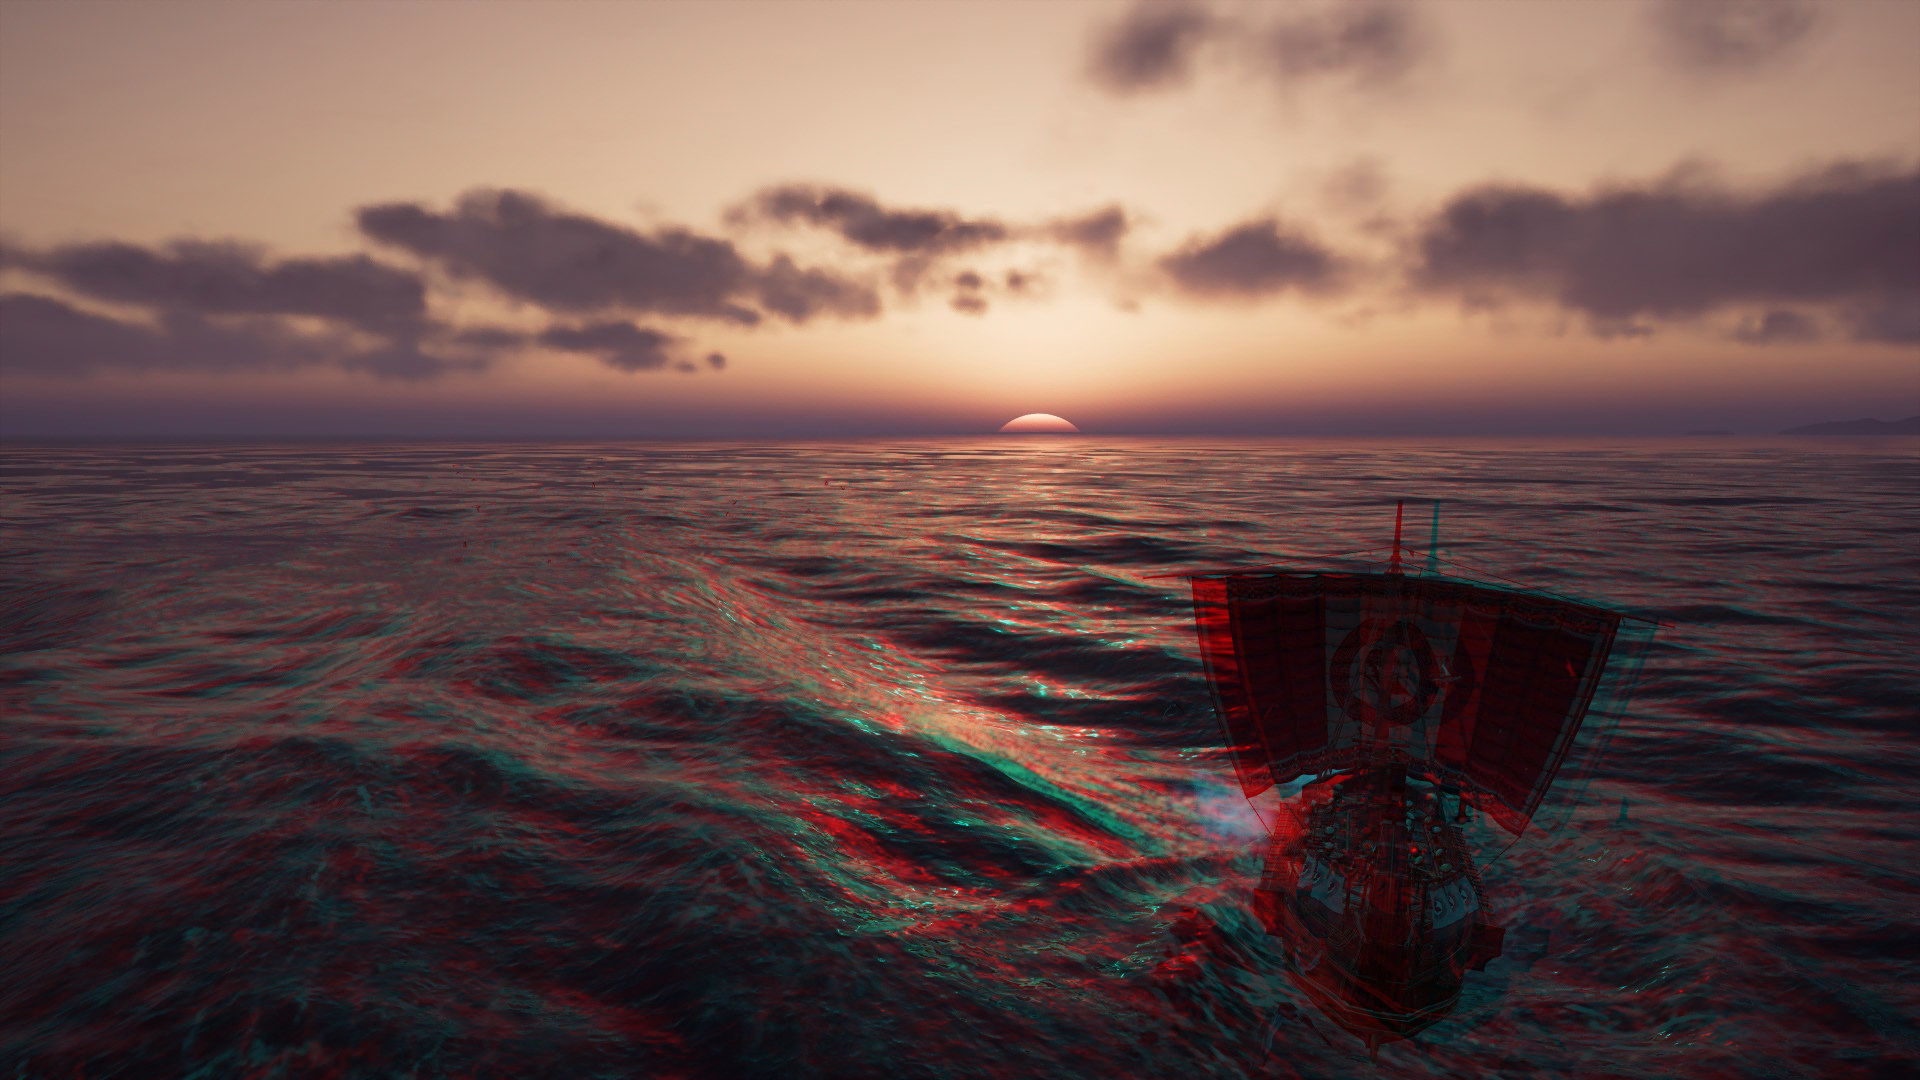 3D image from Assassins Creed Odyssey showing a ship sailing into the sunset.